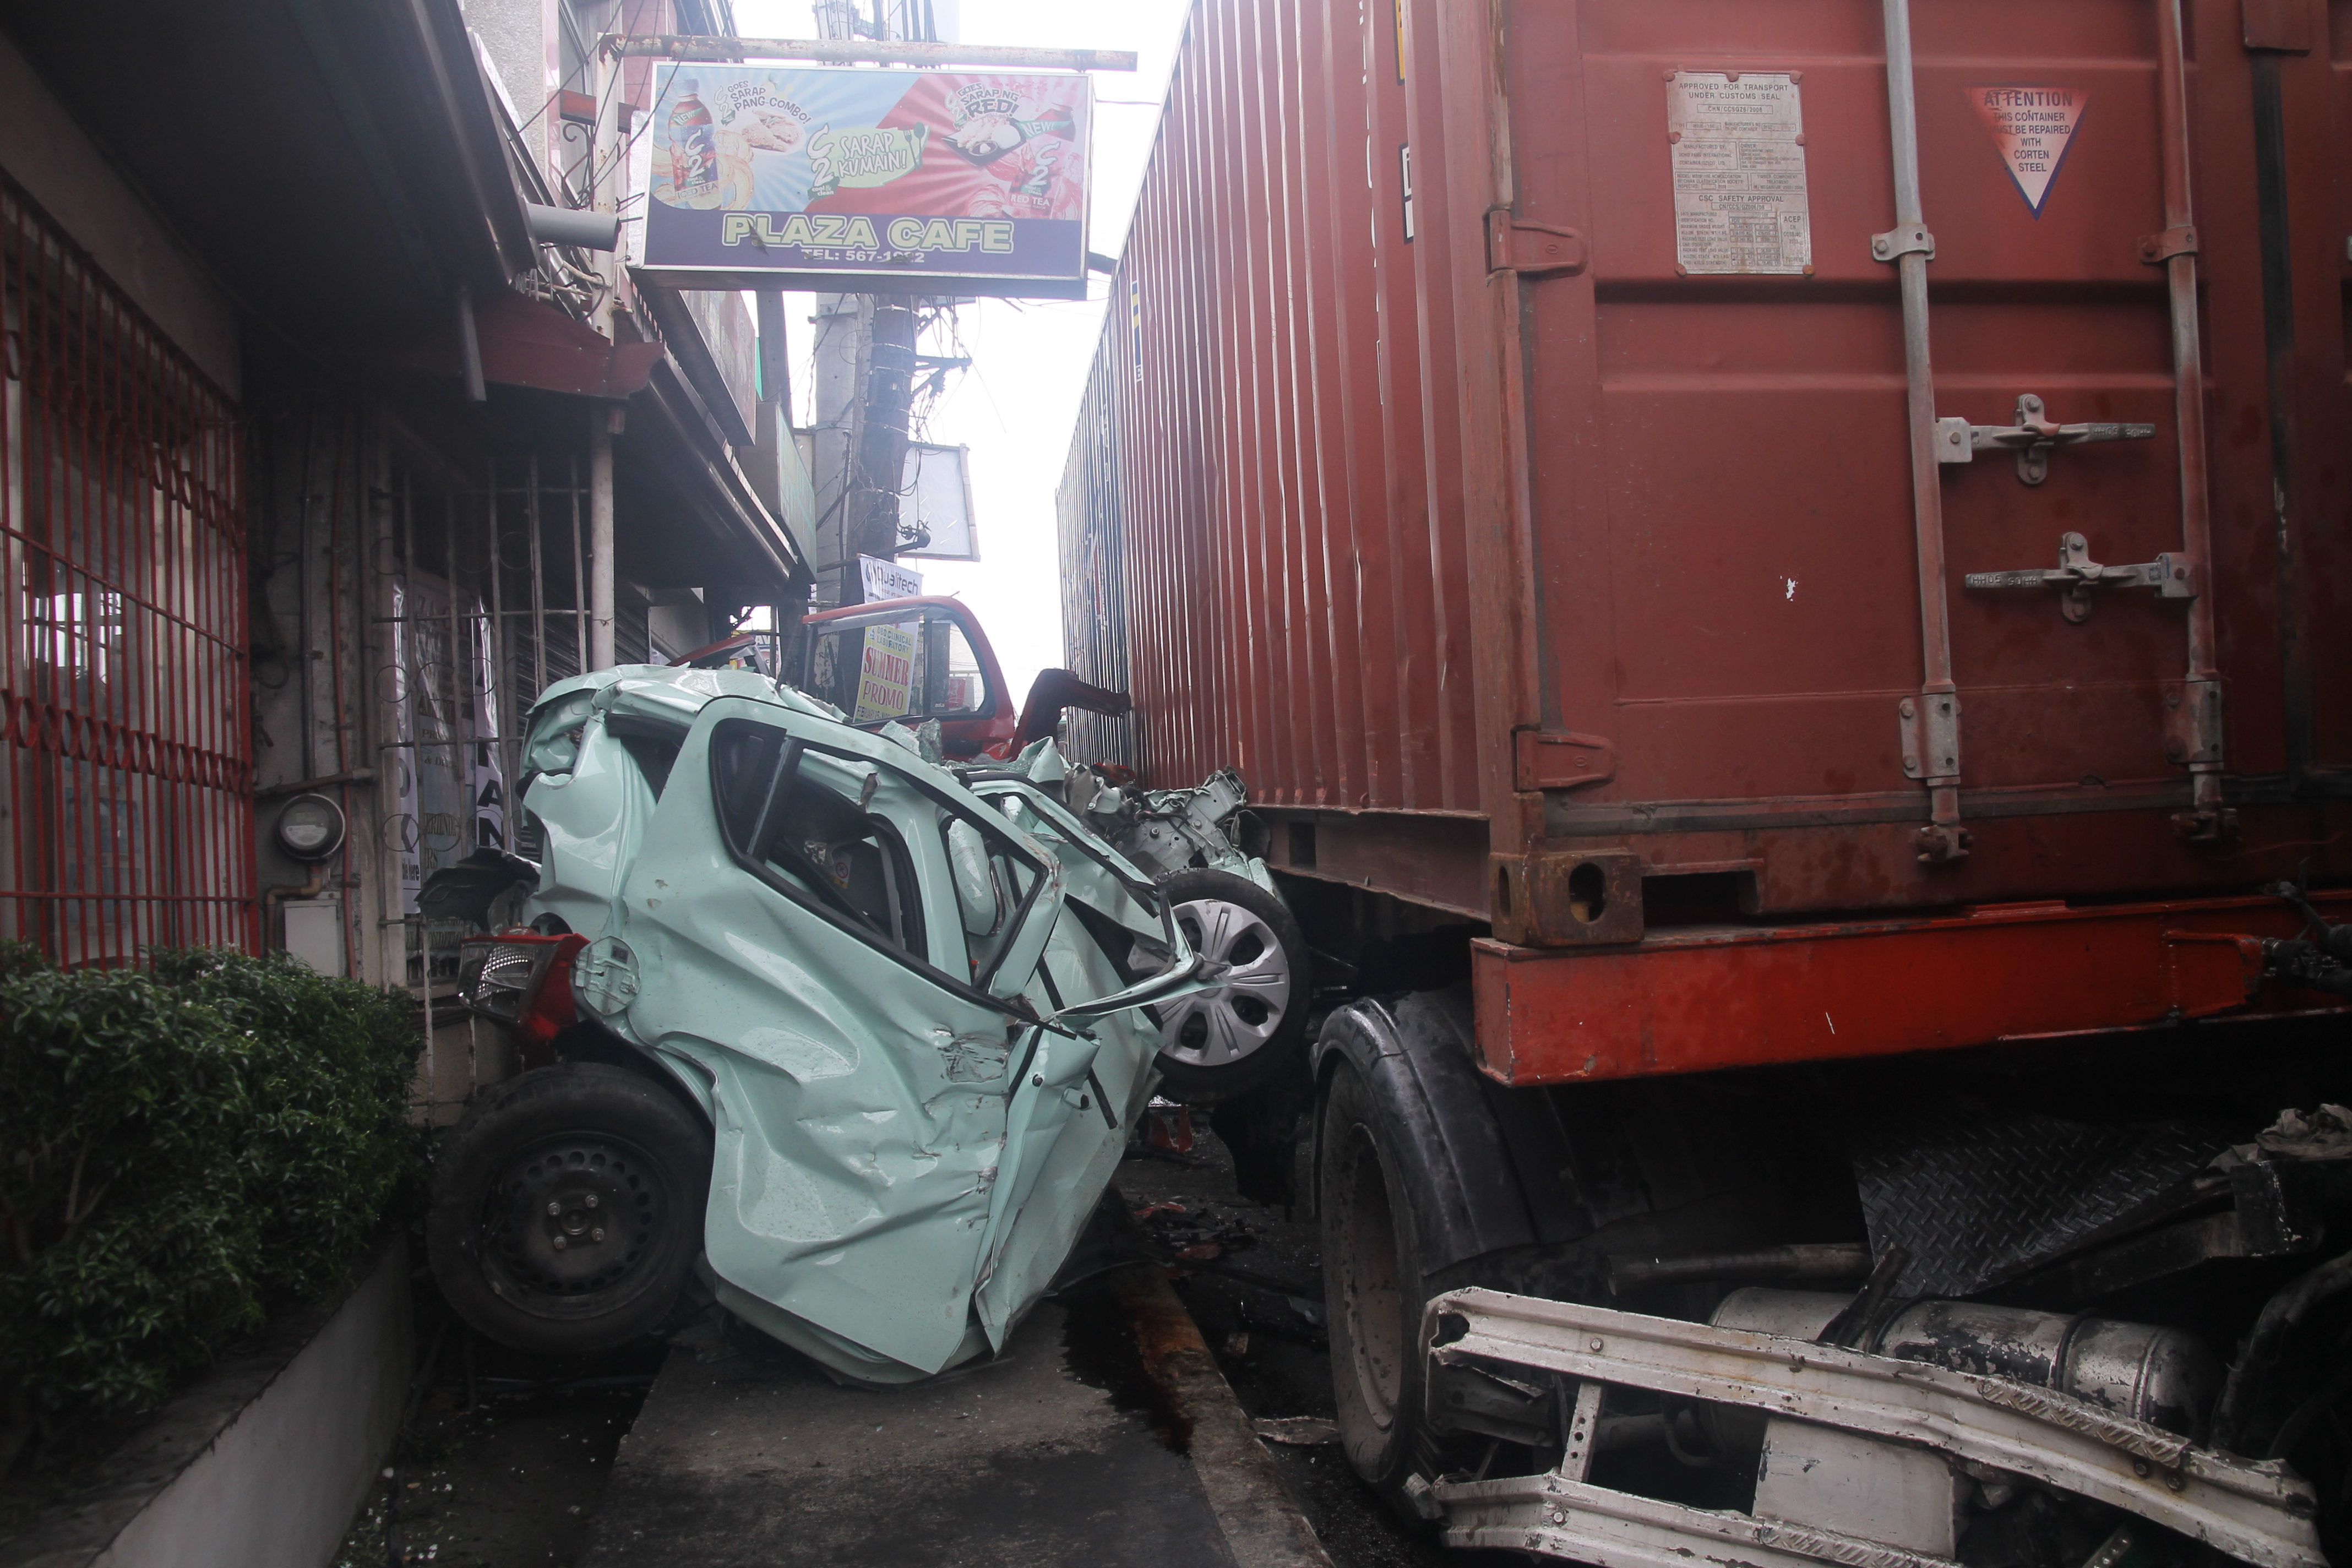 At least one person was hurt in this accident along the national highway in Alaminos town in Laguna province which involved five vehicles. KIMMY BARAOIDAN/INQUIRER SOUTHERN LUZON